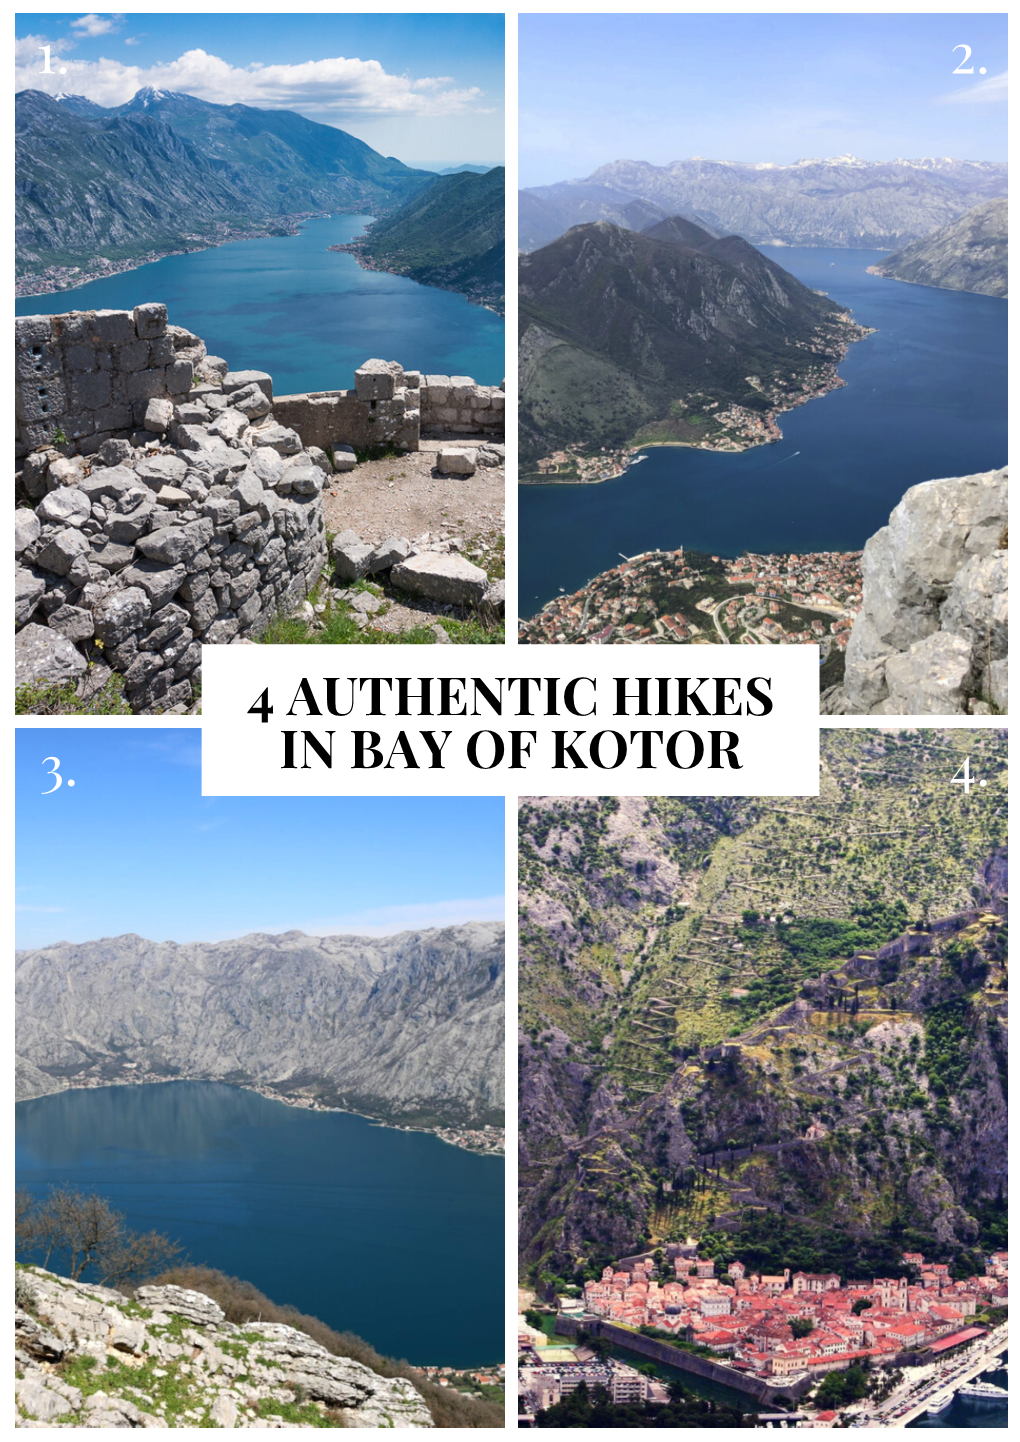 Copy of Authentic Hikes in Bay of Kotor Caeli Travel